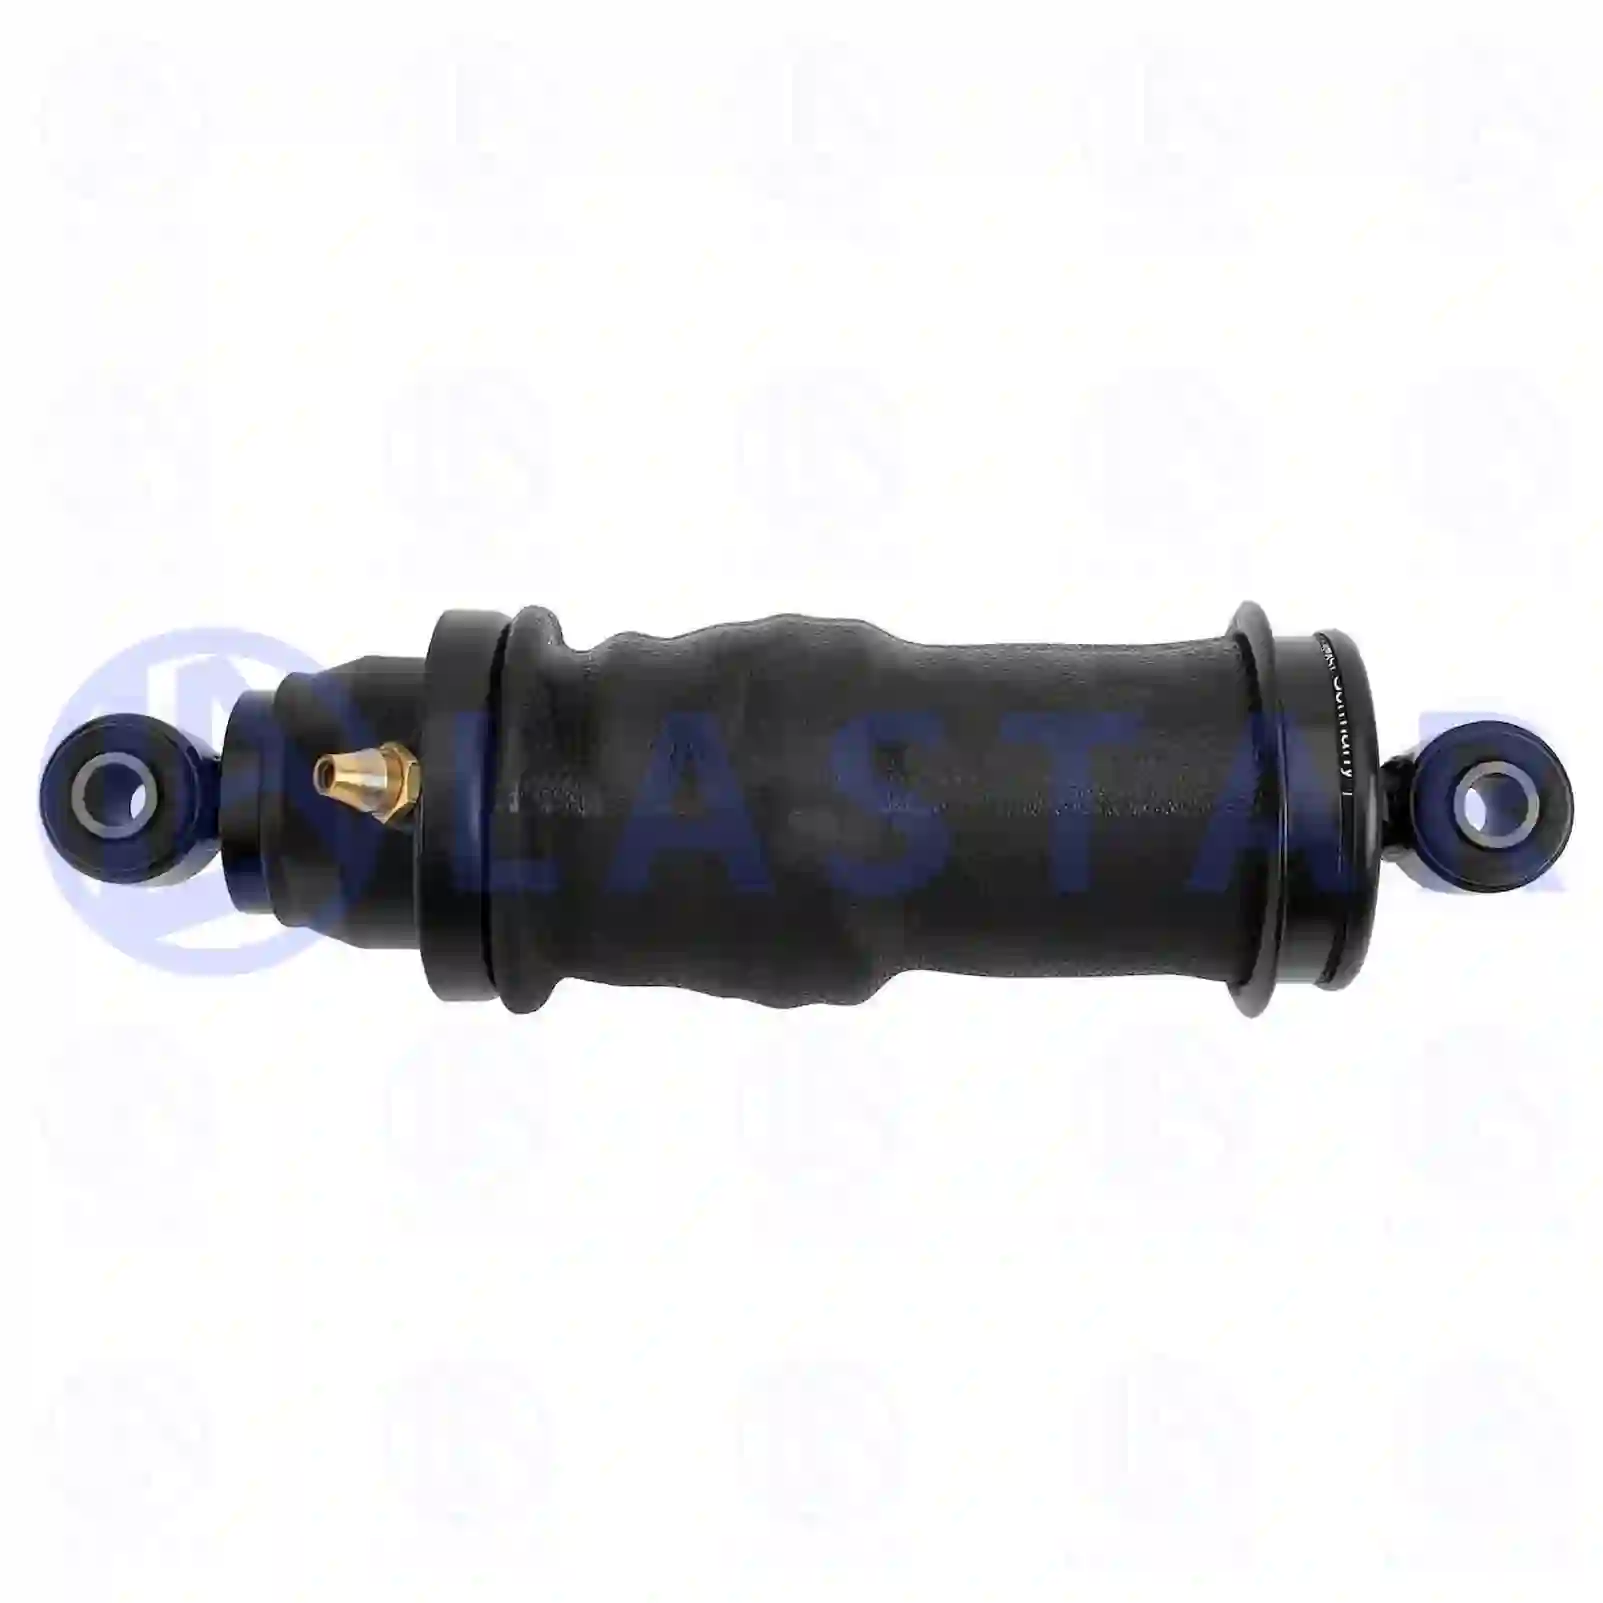 Cabin shock absorber, with air bellow, 77734861, 9428900219, 9428906019, 9438903919 ||  77734861 Lastar Spare Part | Truck Spare Parts, Auotomotive Spare Parts Cabin shock absorber, with air bellow, 77734861, 9428900219, 9428906019, 9438903919 ||  77734861 Lastar Spare Part | Truck Spare Parts, Auotomotive Spare Parts